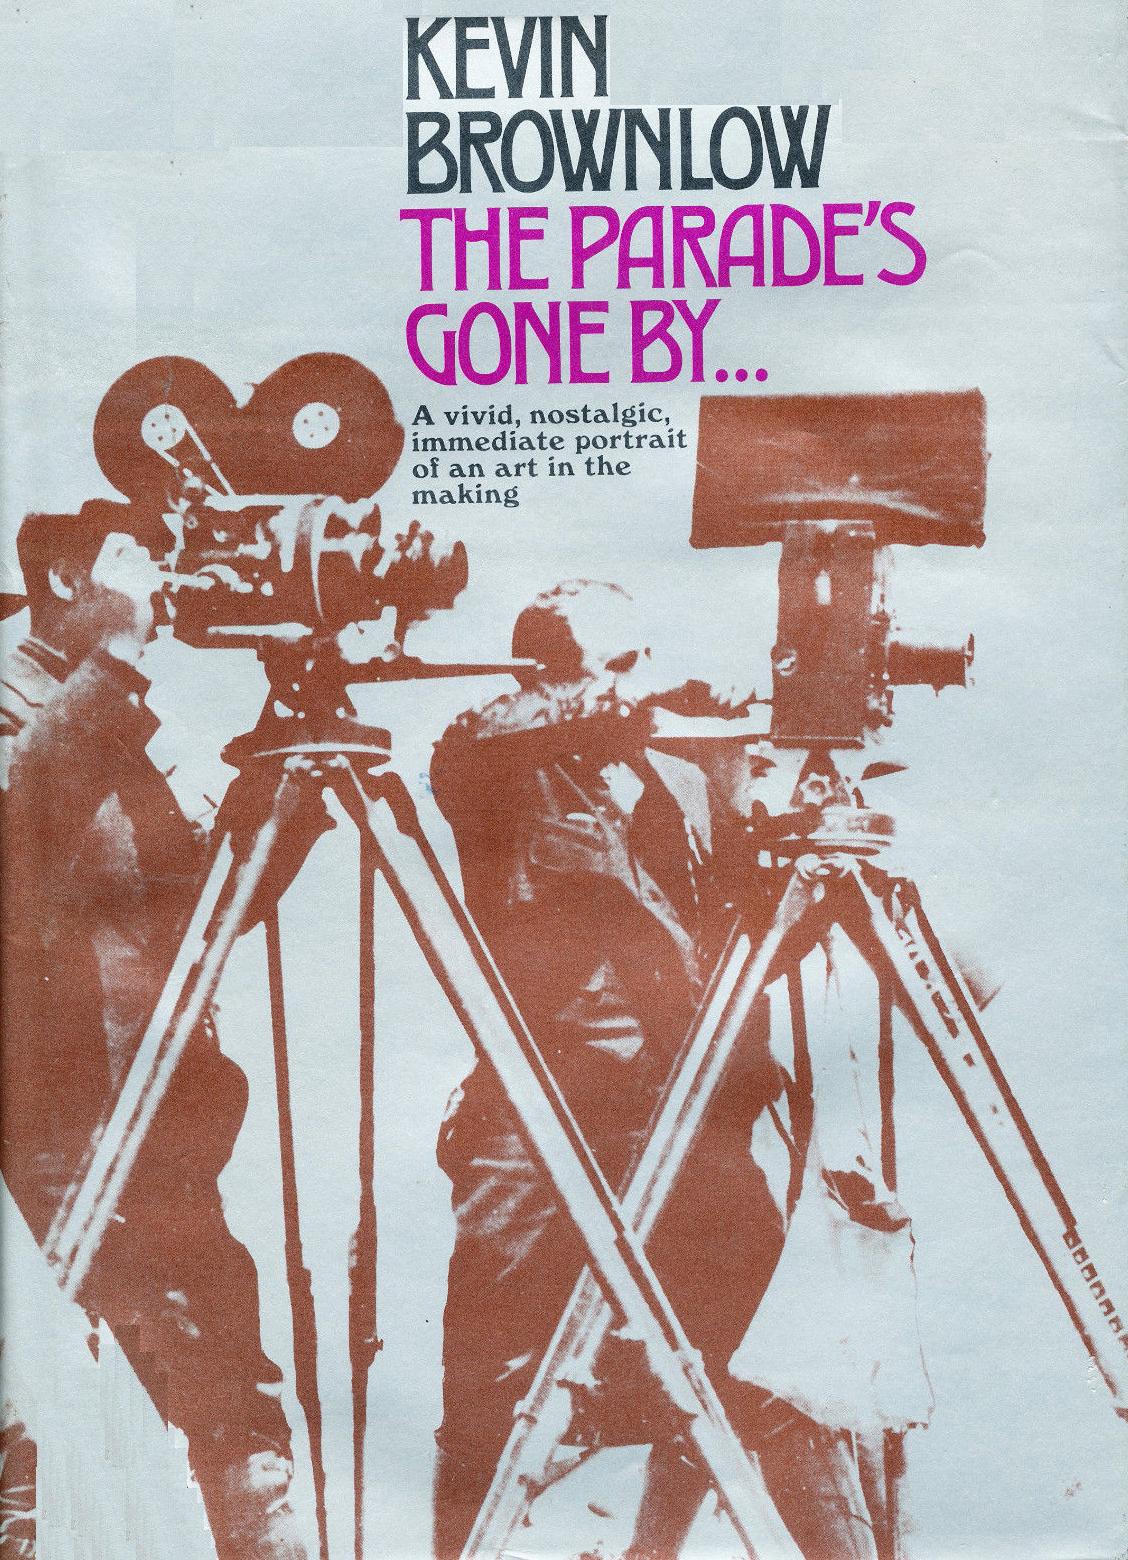 COVER OF KEN BROWNLOW'S THE PARADE"S GONE BY